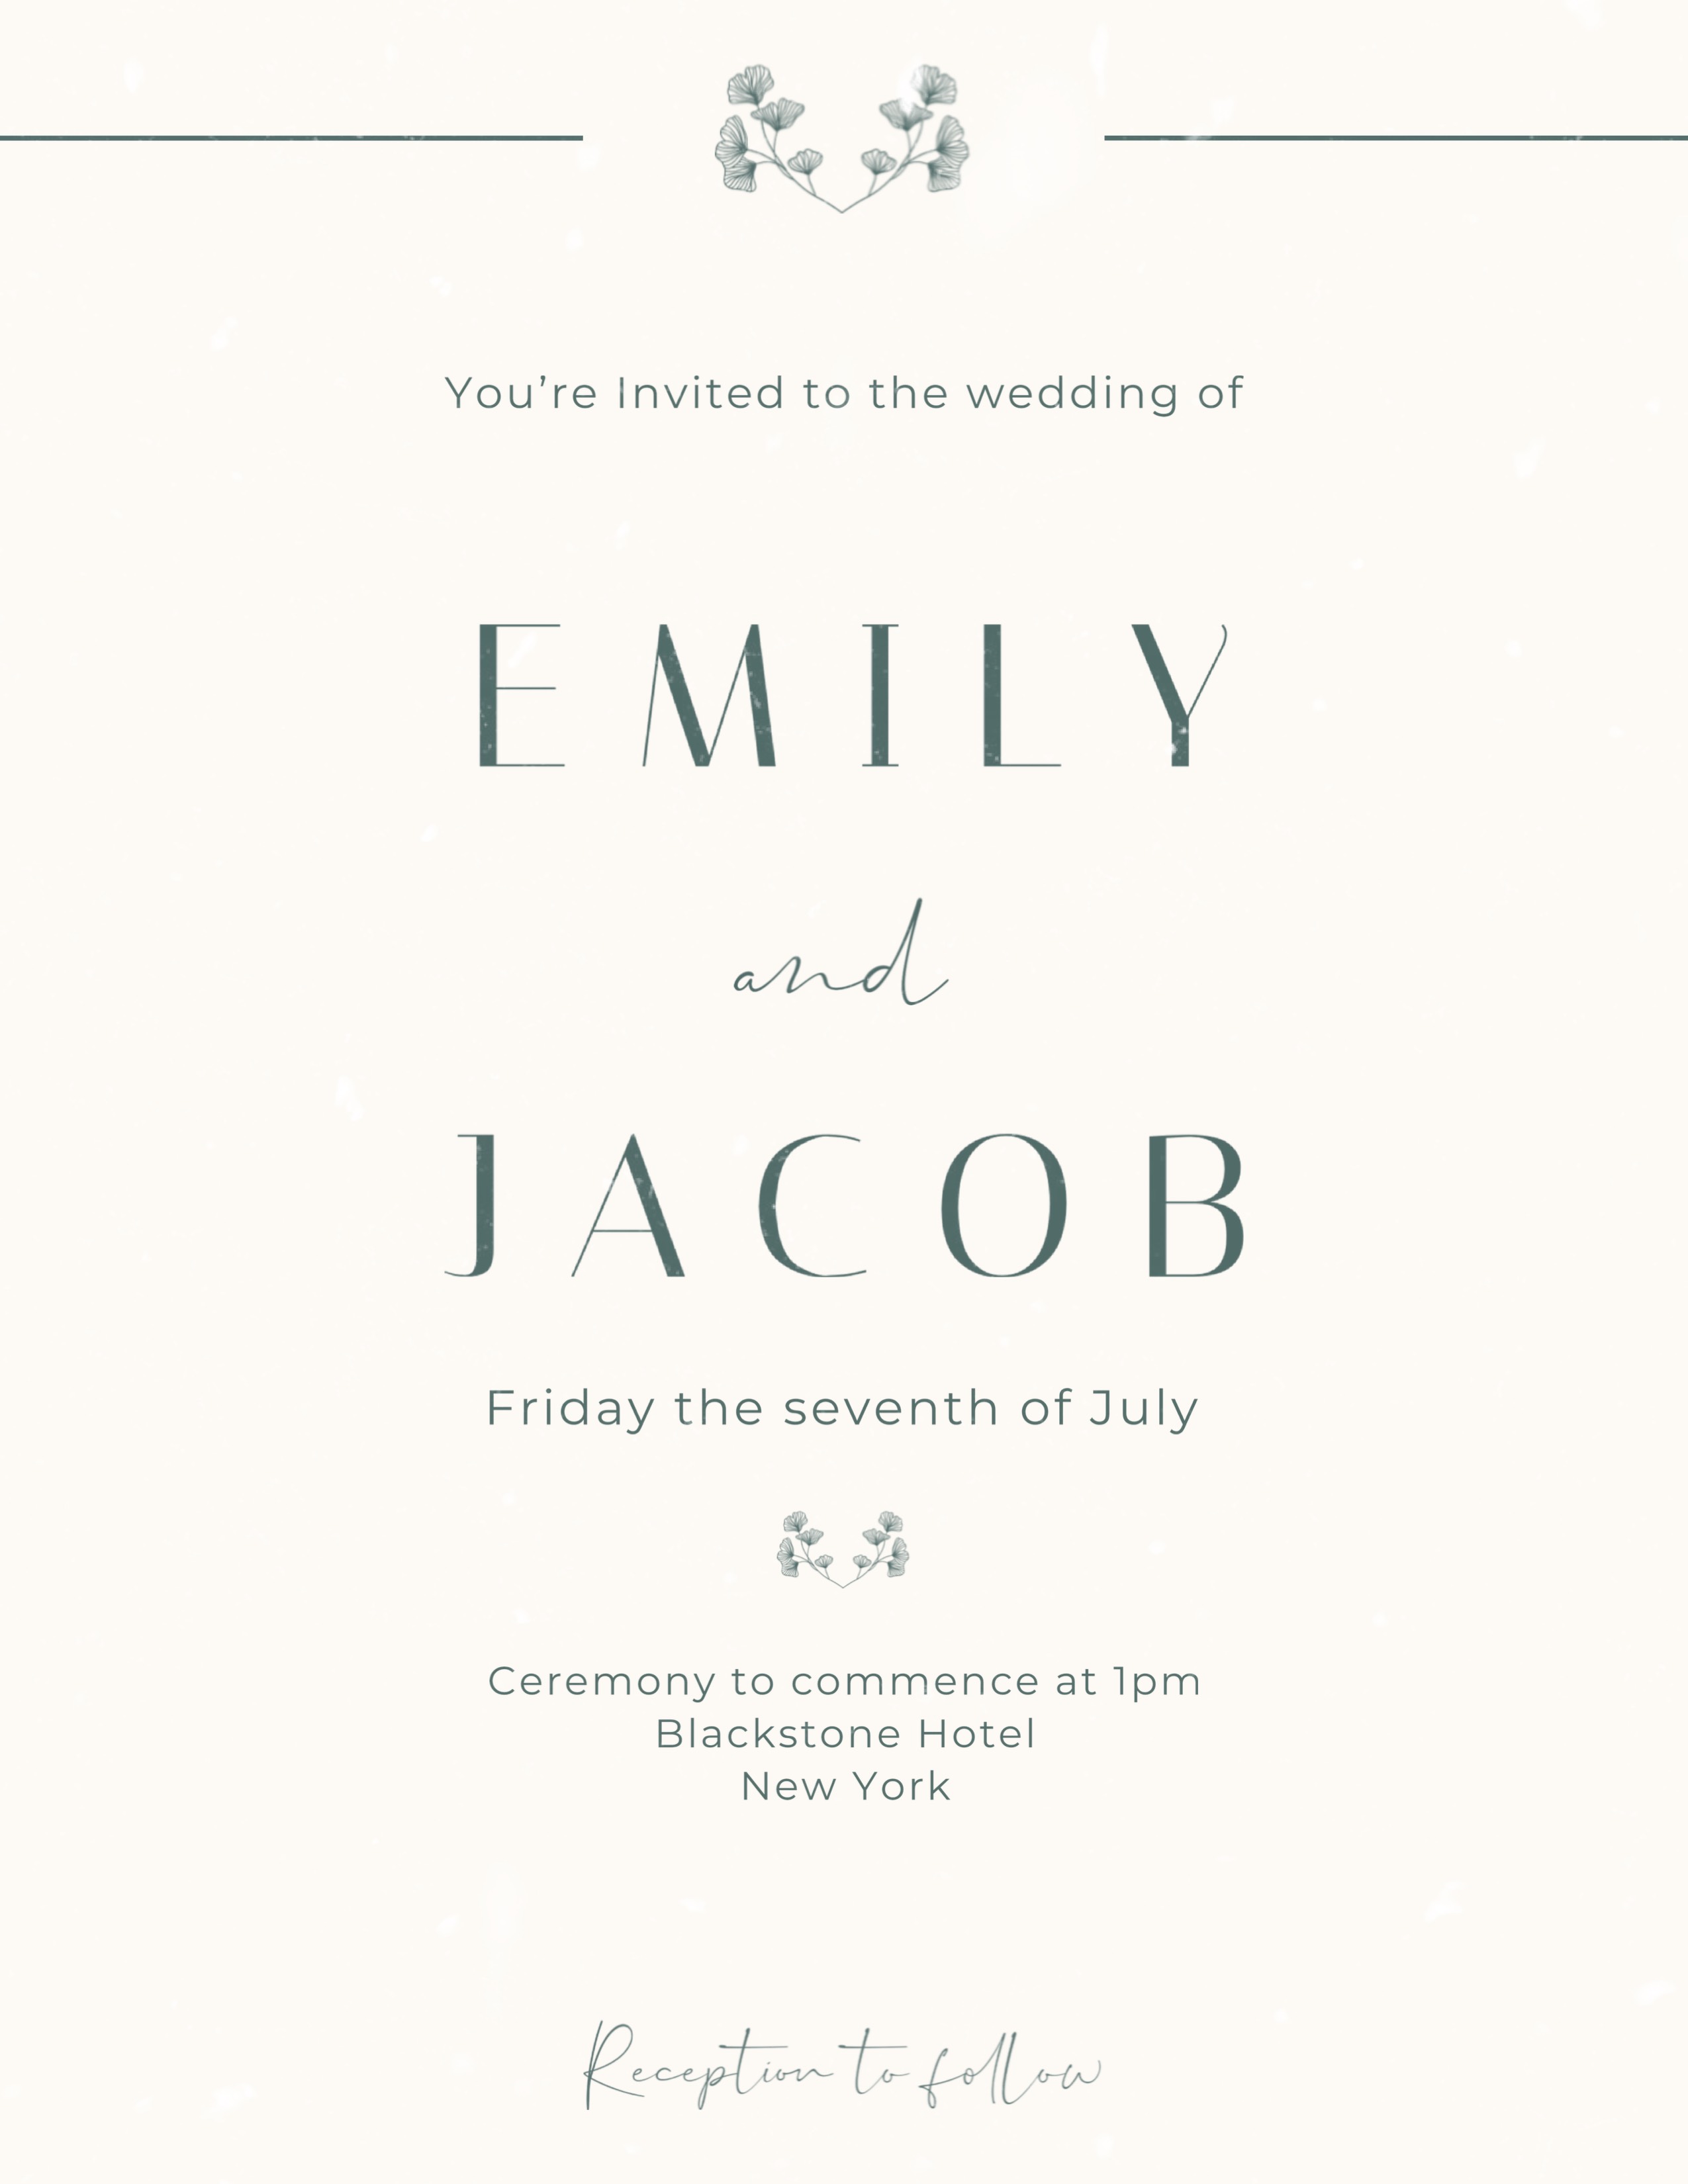 A Wedding Card With A Floral Design On It Wedding Template